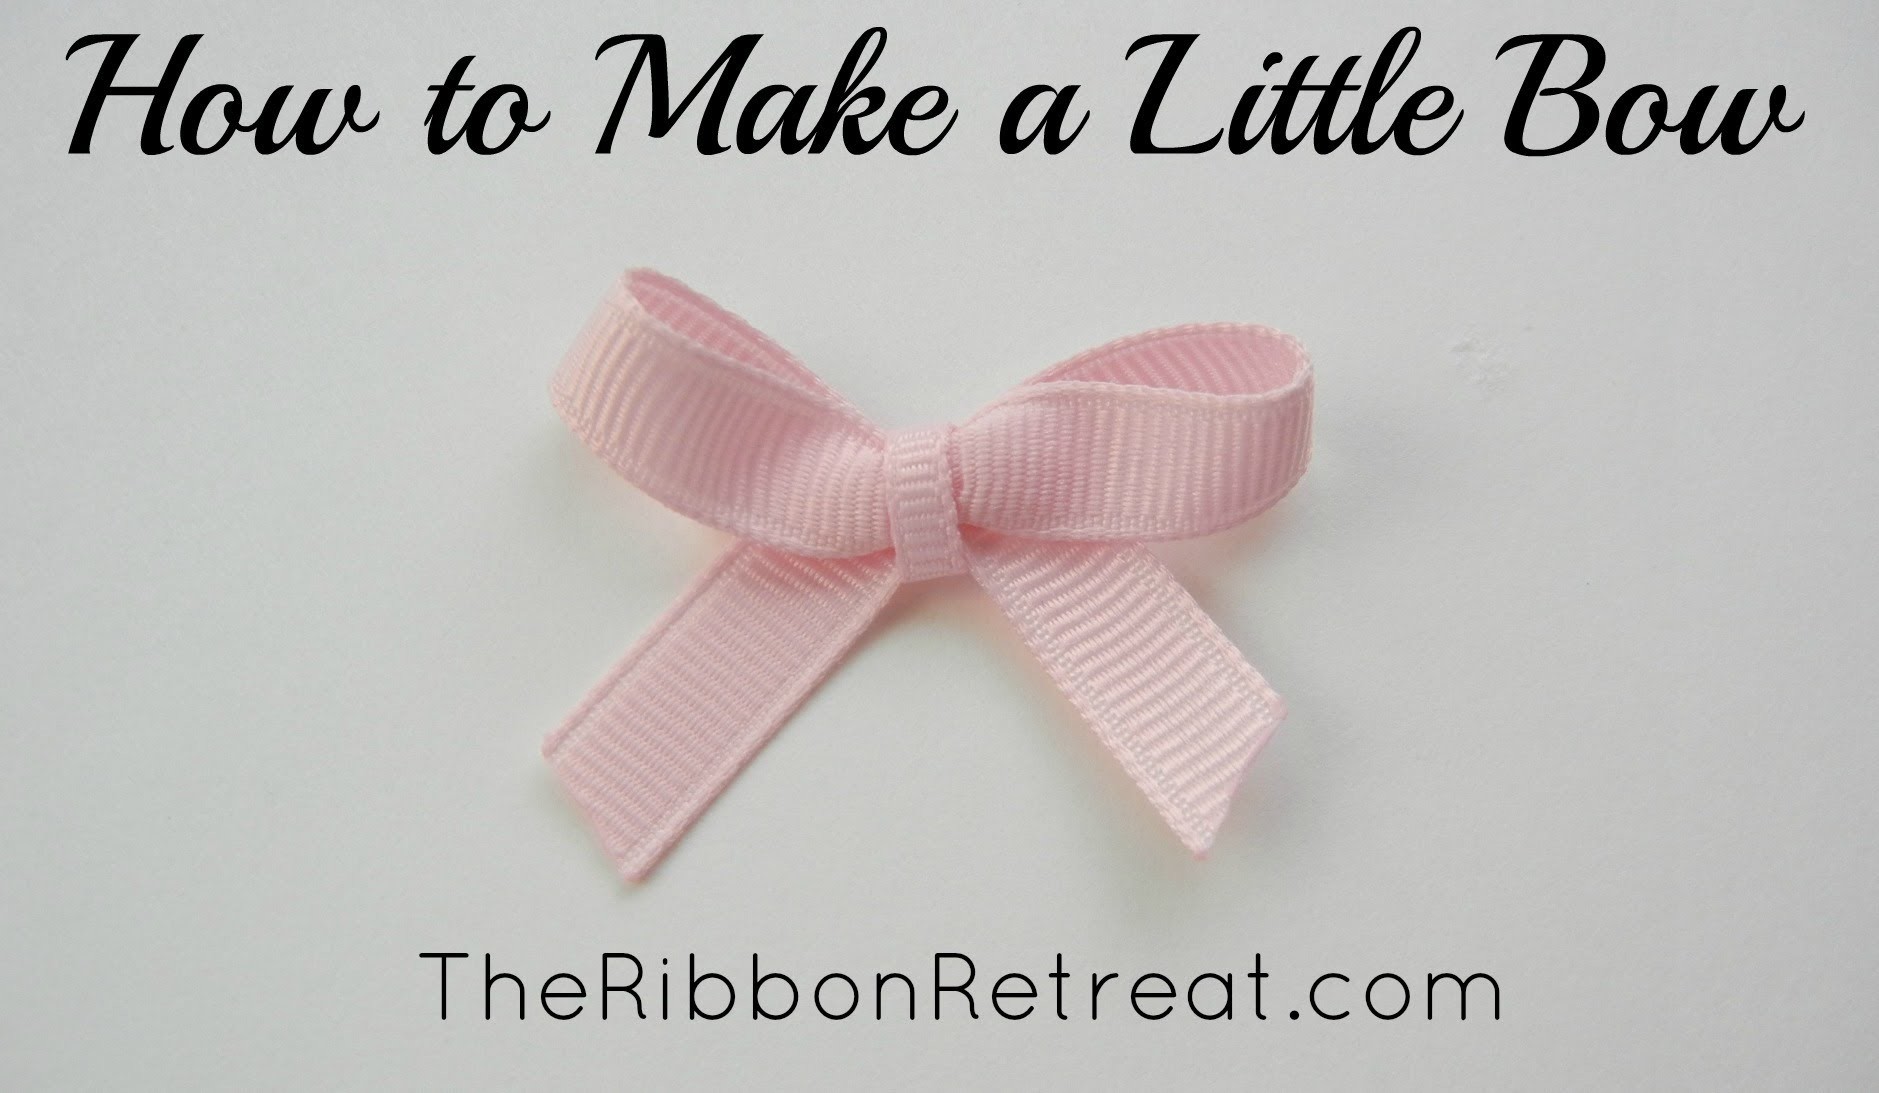 How to Make a Little Bow - TheRibbonRetreat.com